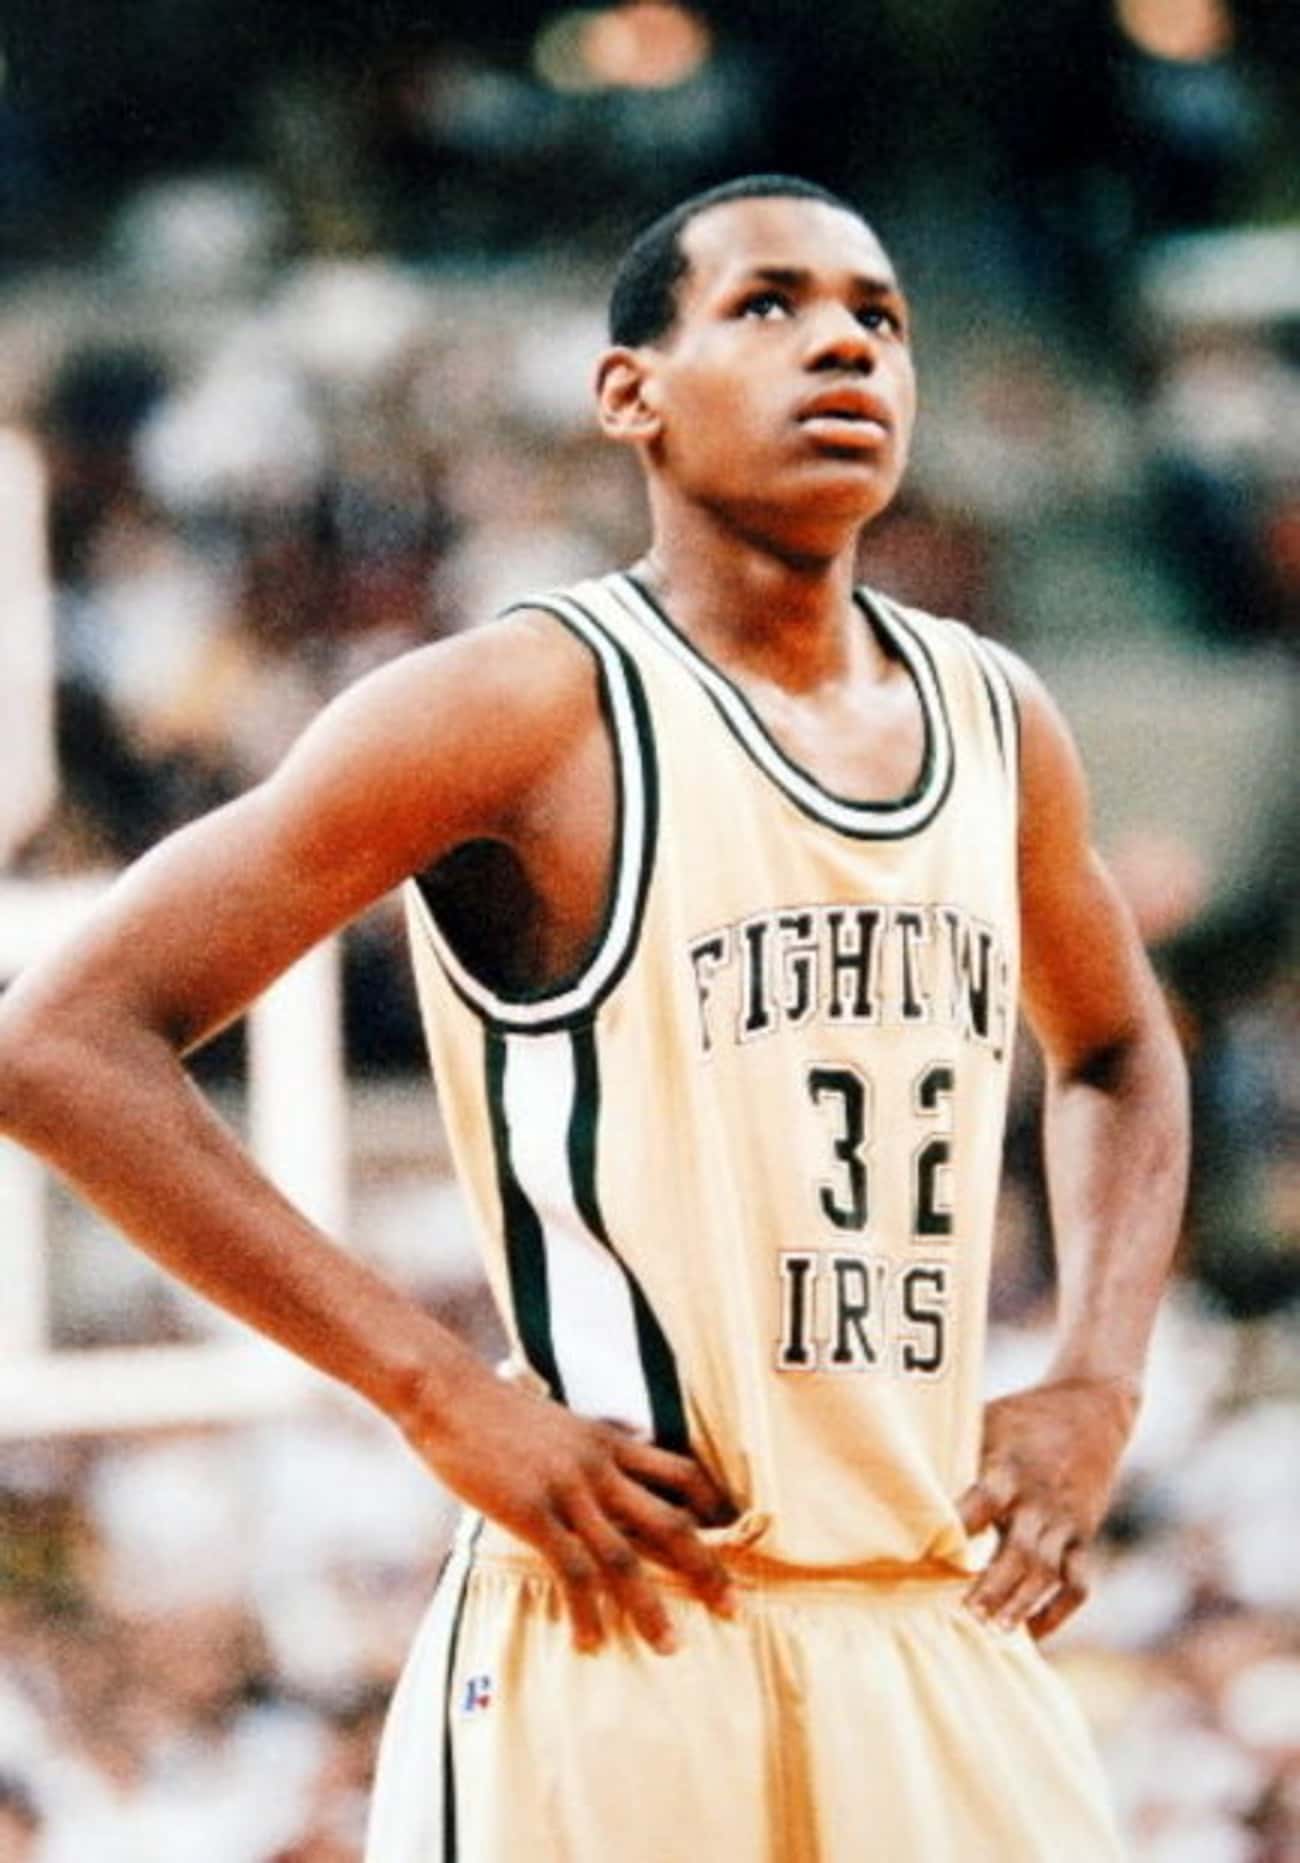 Young LeBron James as a Teenager